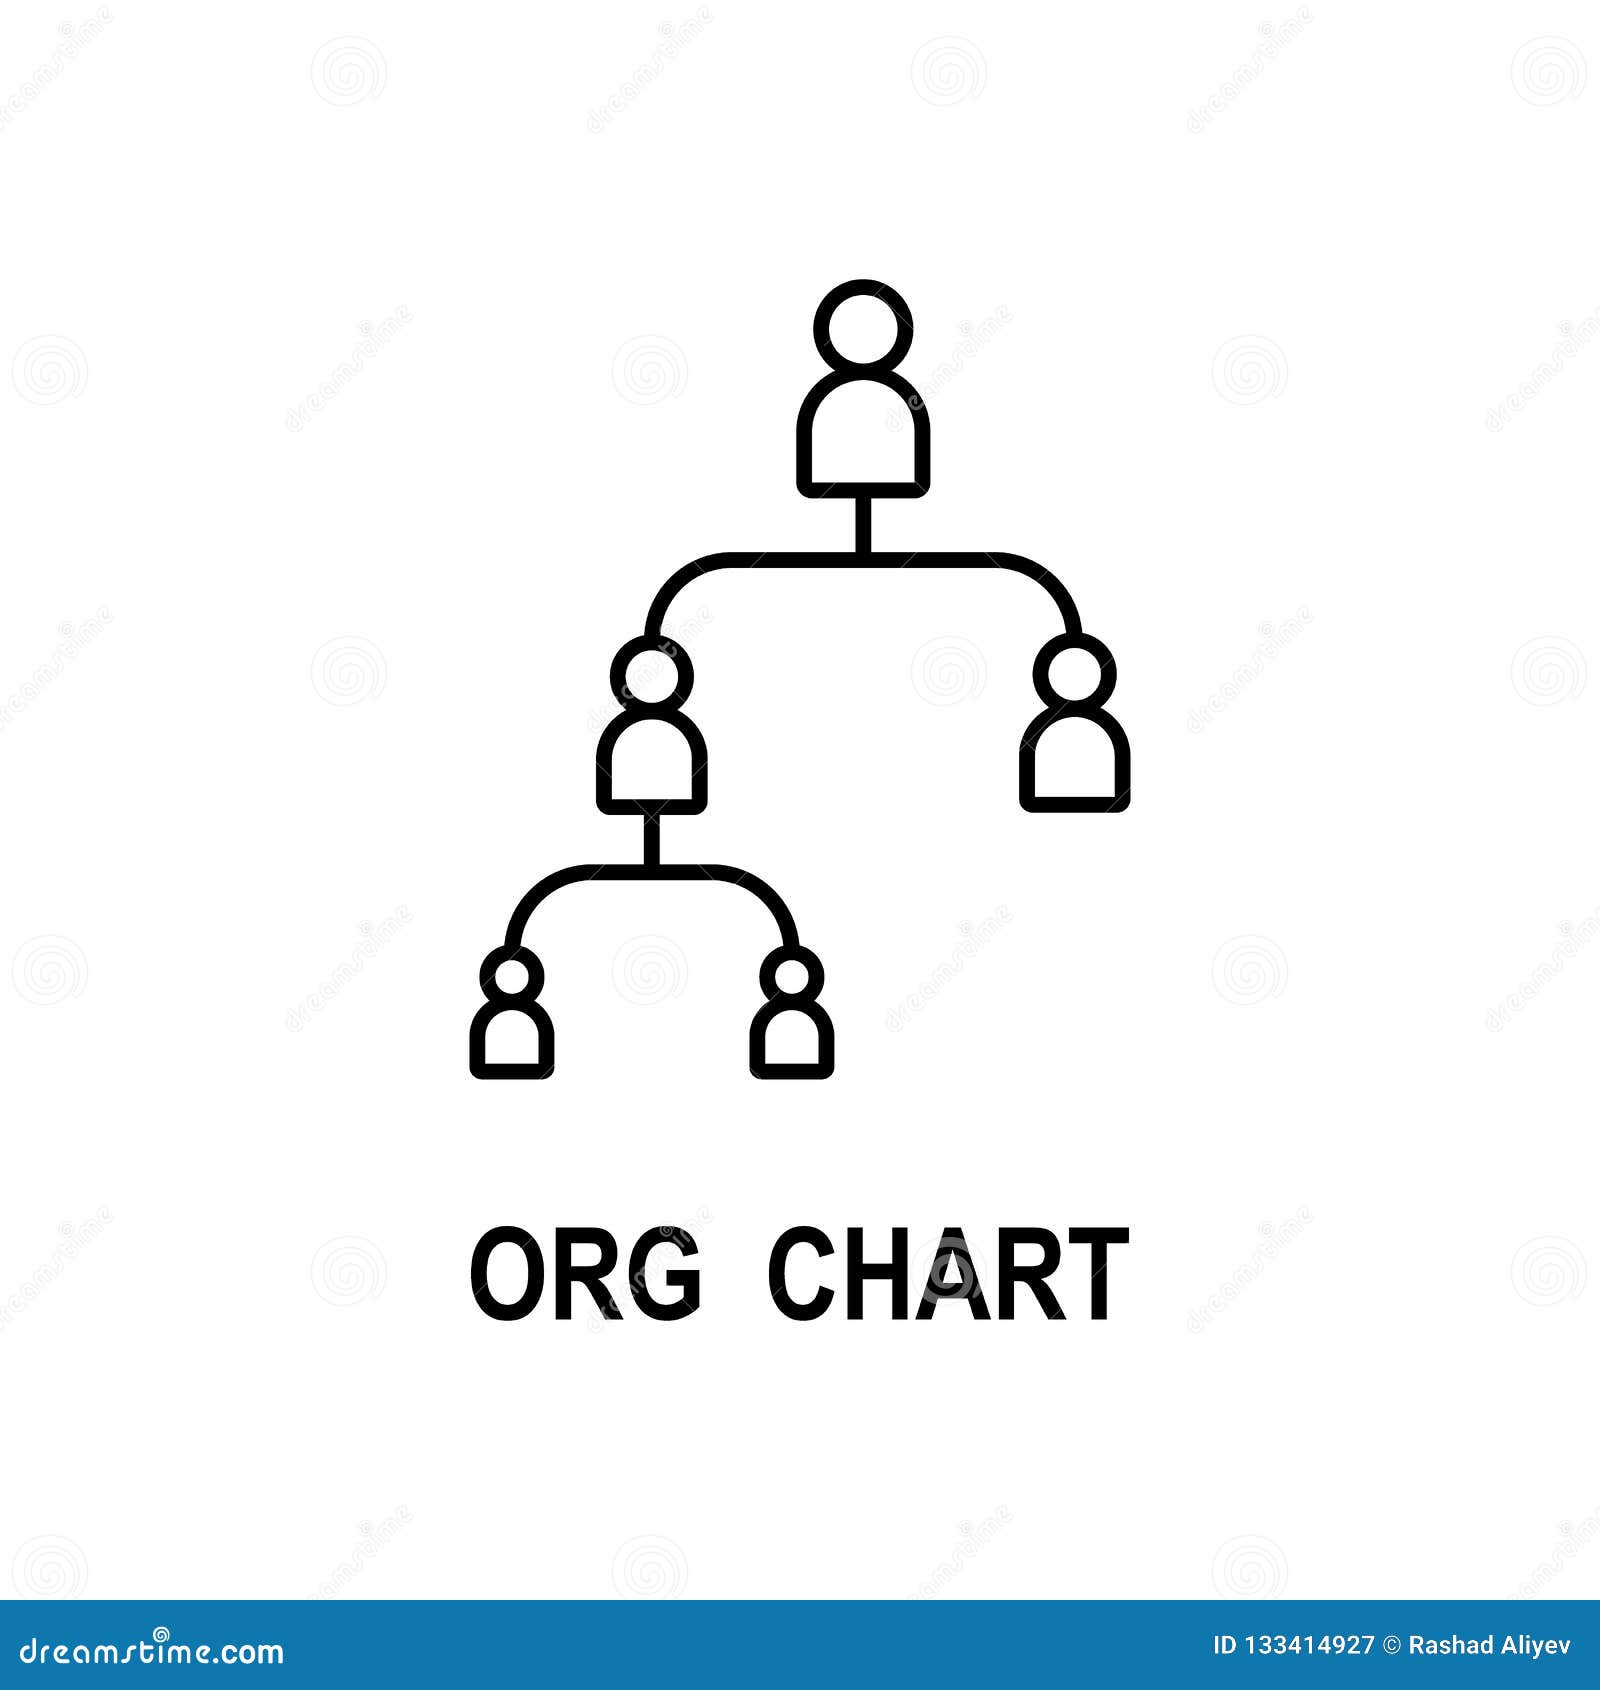 What Is An Organizational Chart Used For